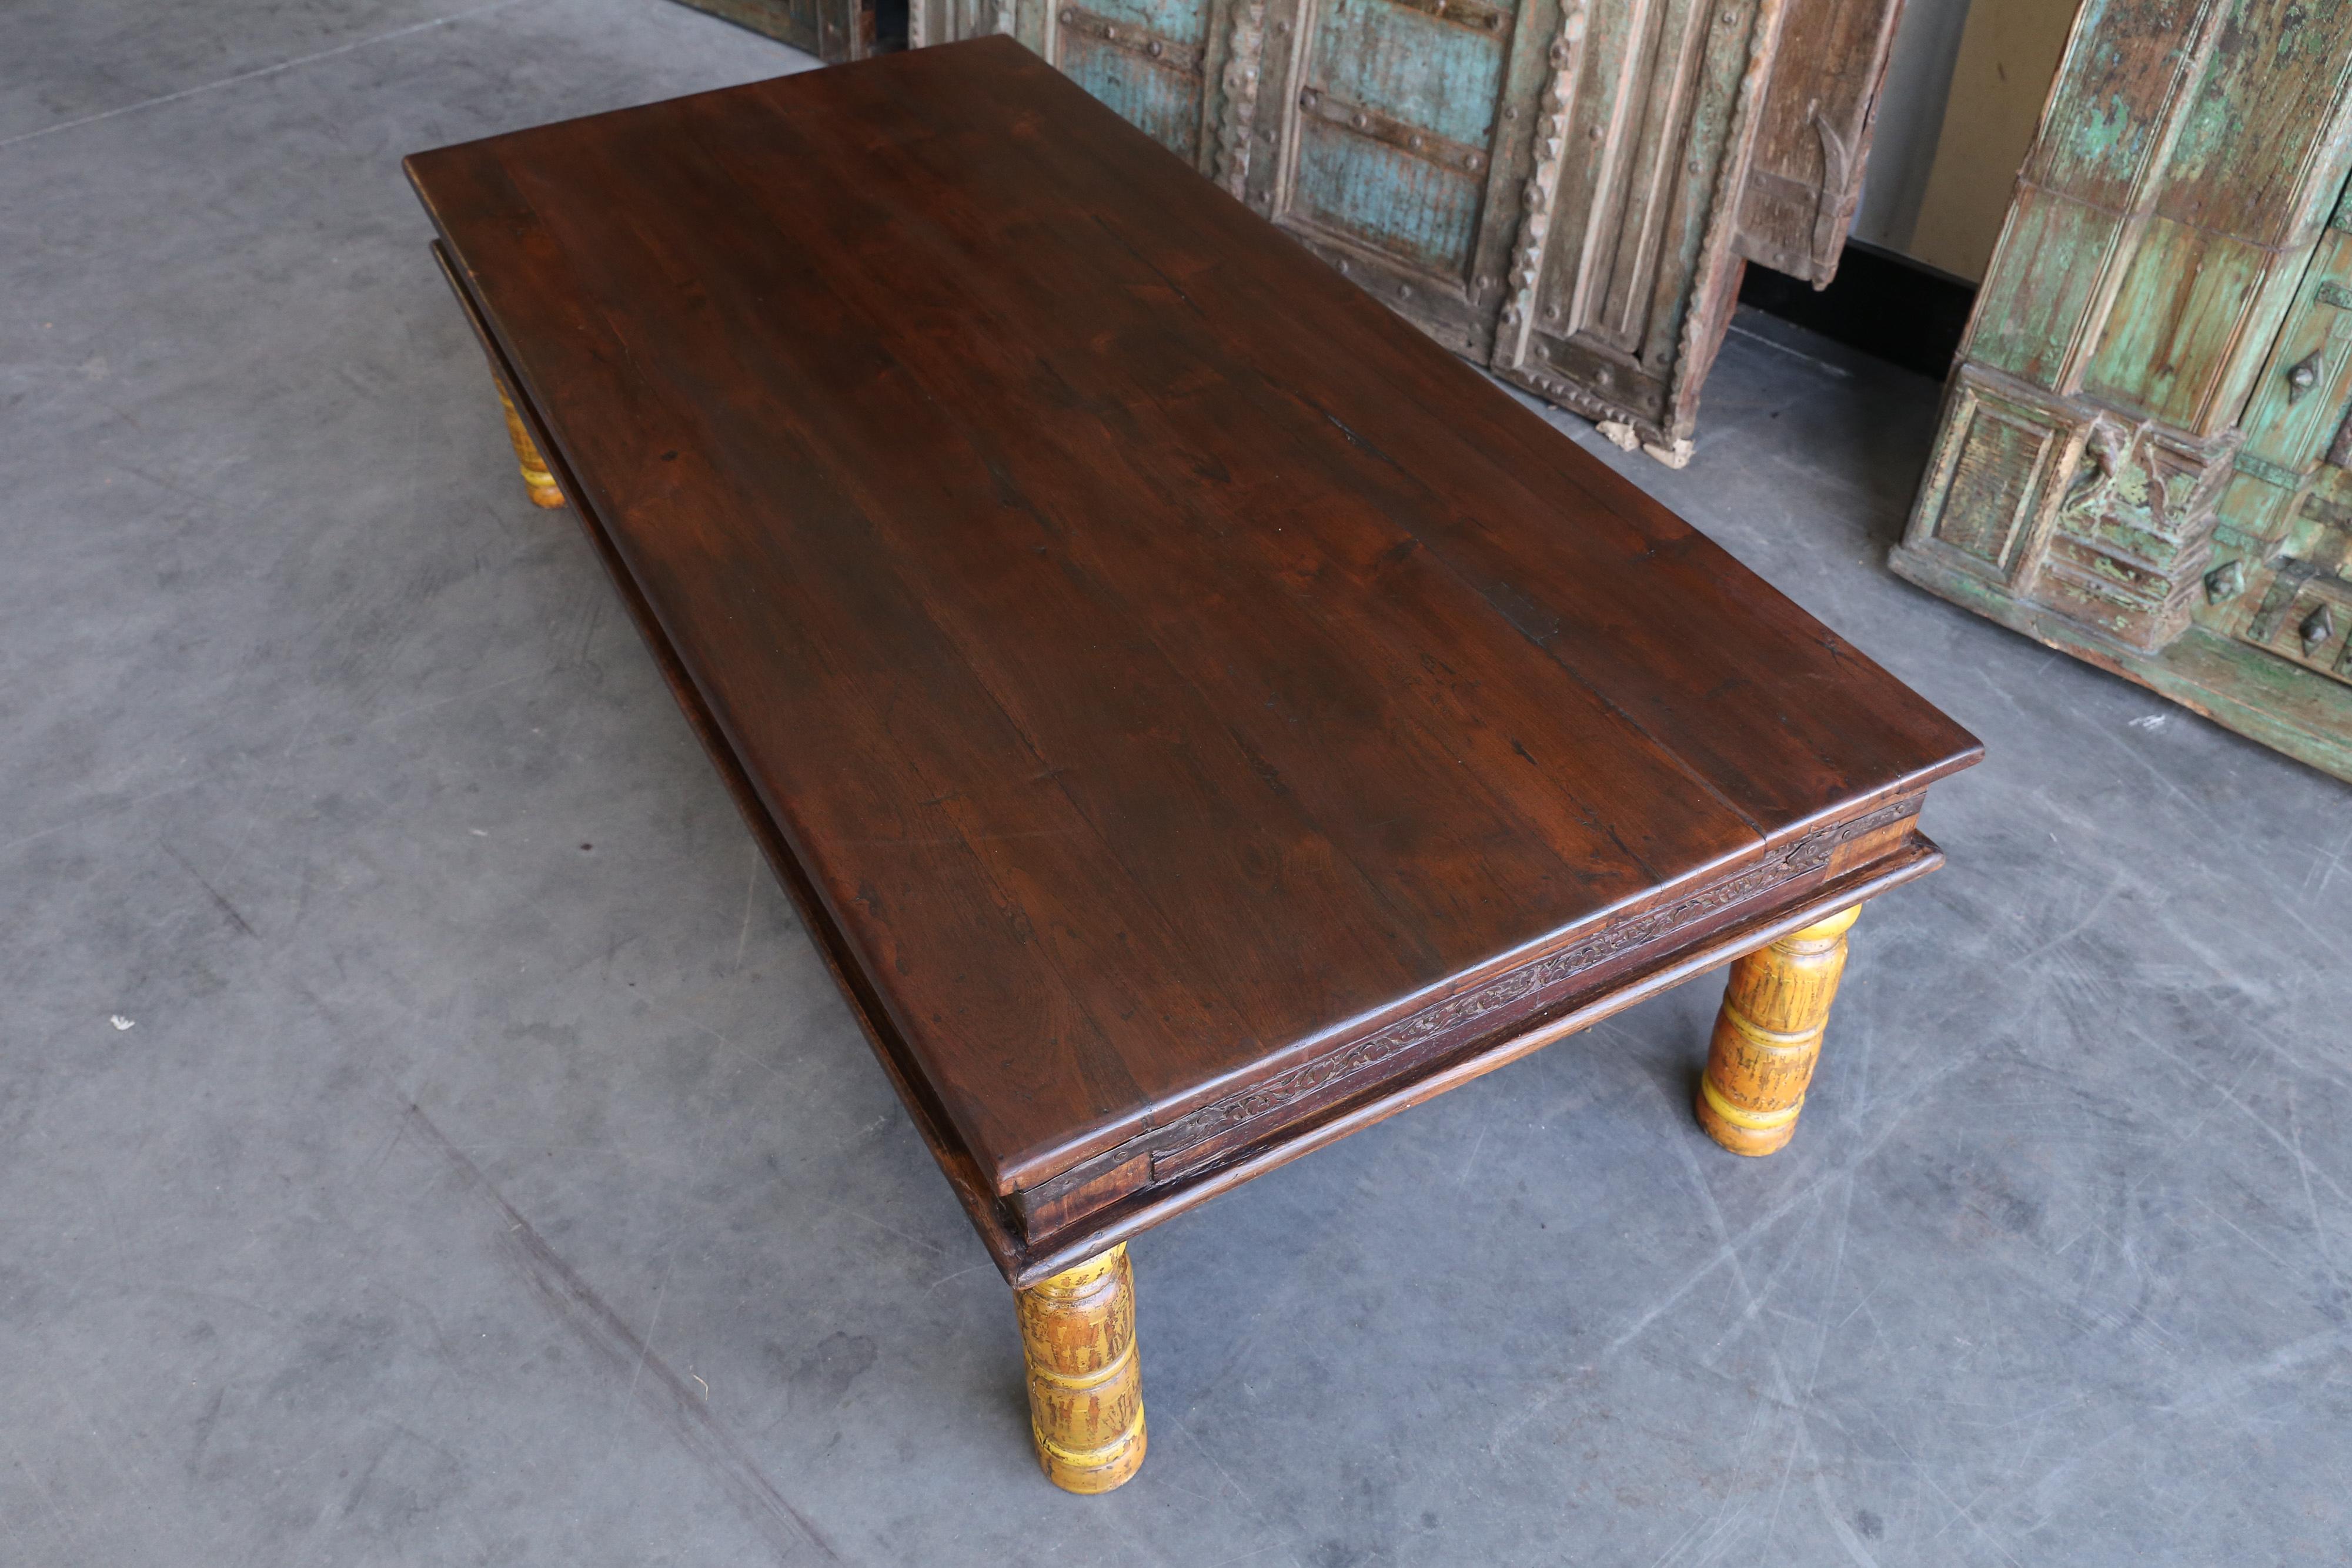 19th Century Idealistic Solid Teak Wood Coffee Table from a Tea Plantation For Sale 3